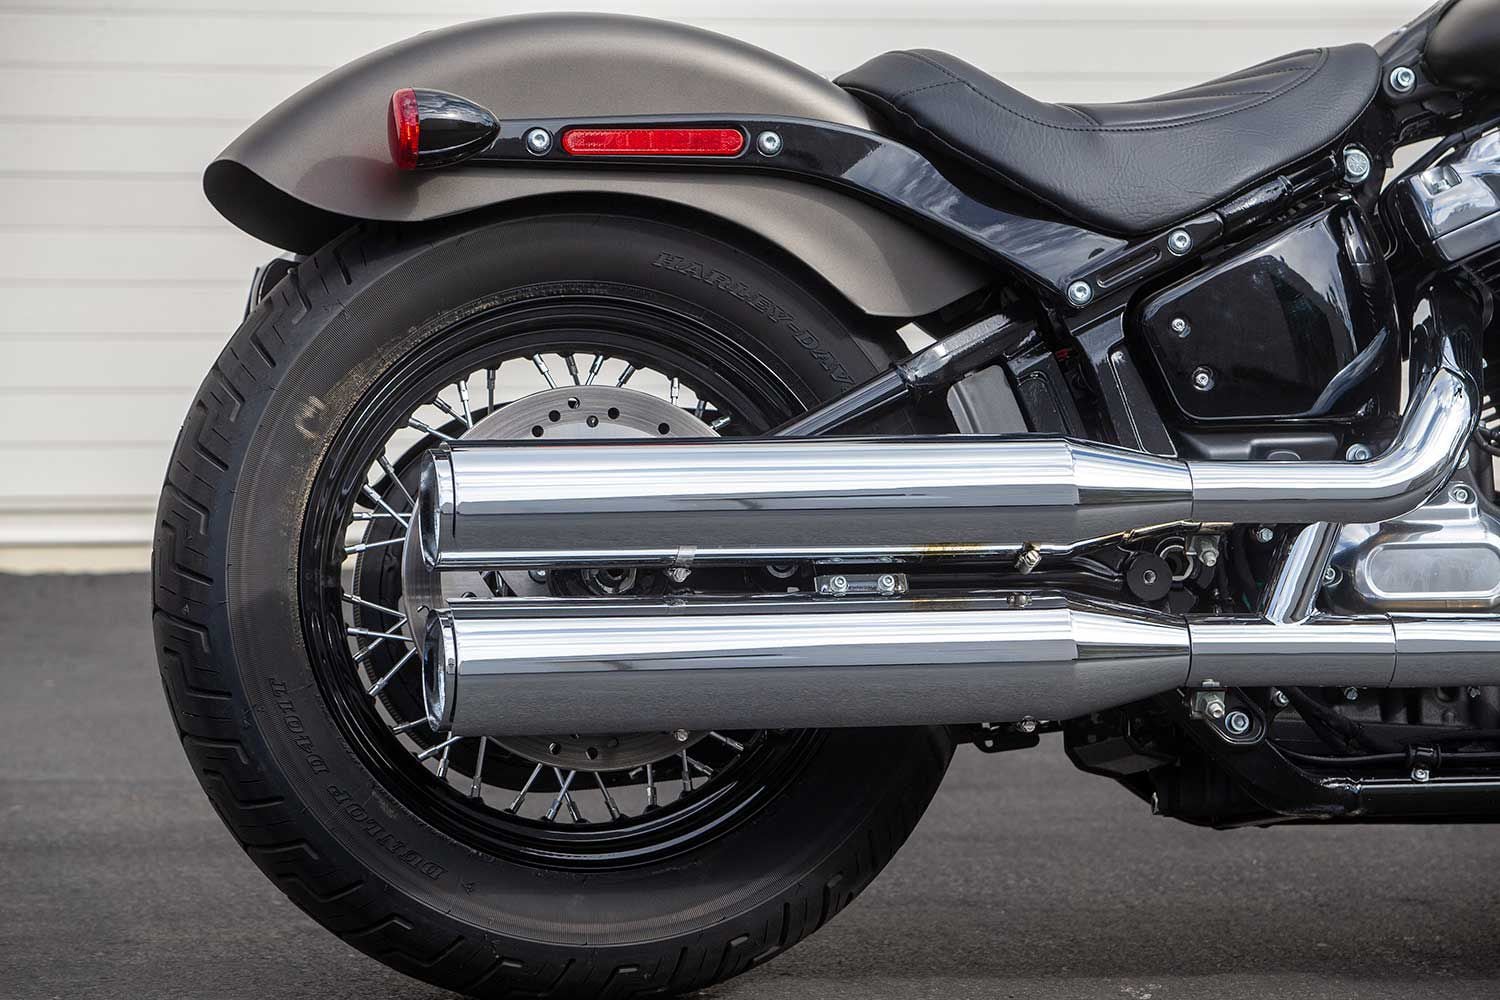 A beautiful 2-into-2 exhaust adds to the premium quality of the Softail Slim, while letting out a throaty V-twin rumble.